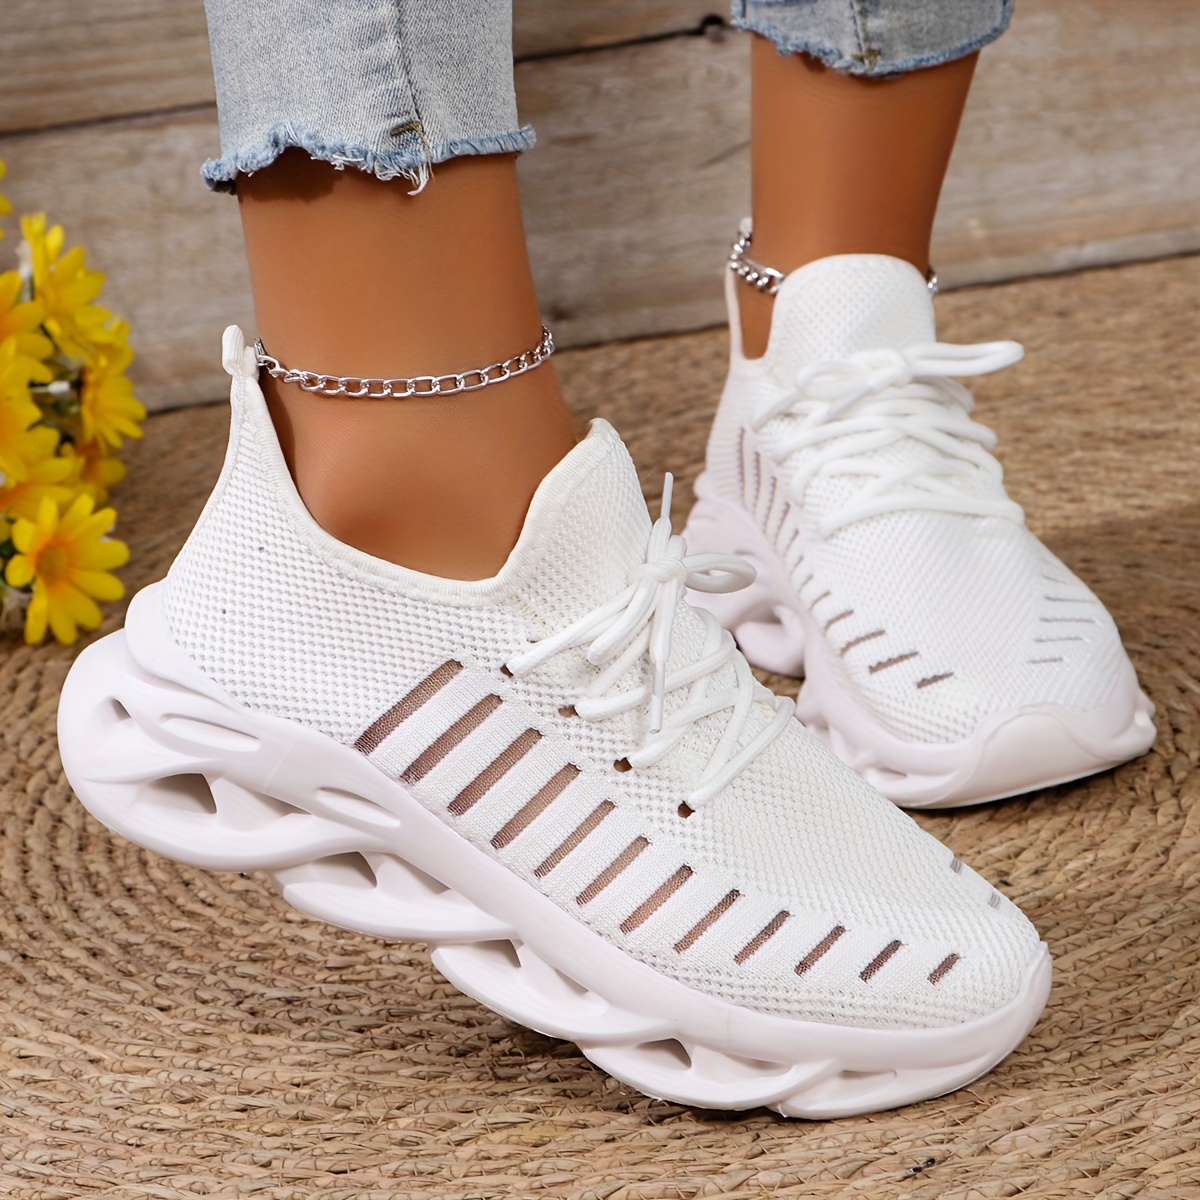 

Women's Knitted Platform Sneakers, White Lace Up Low Top Running & Walking Trainers, Comfy Breathable Athletic Shoes